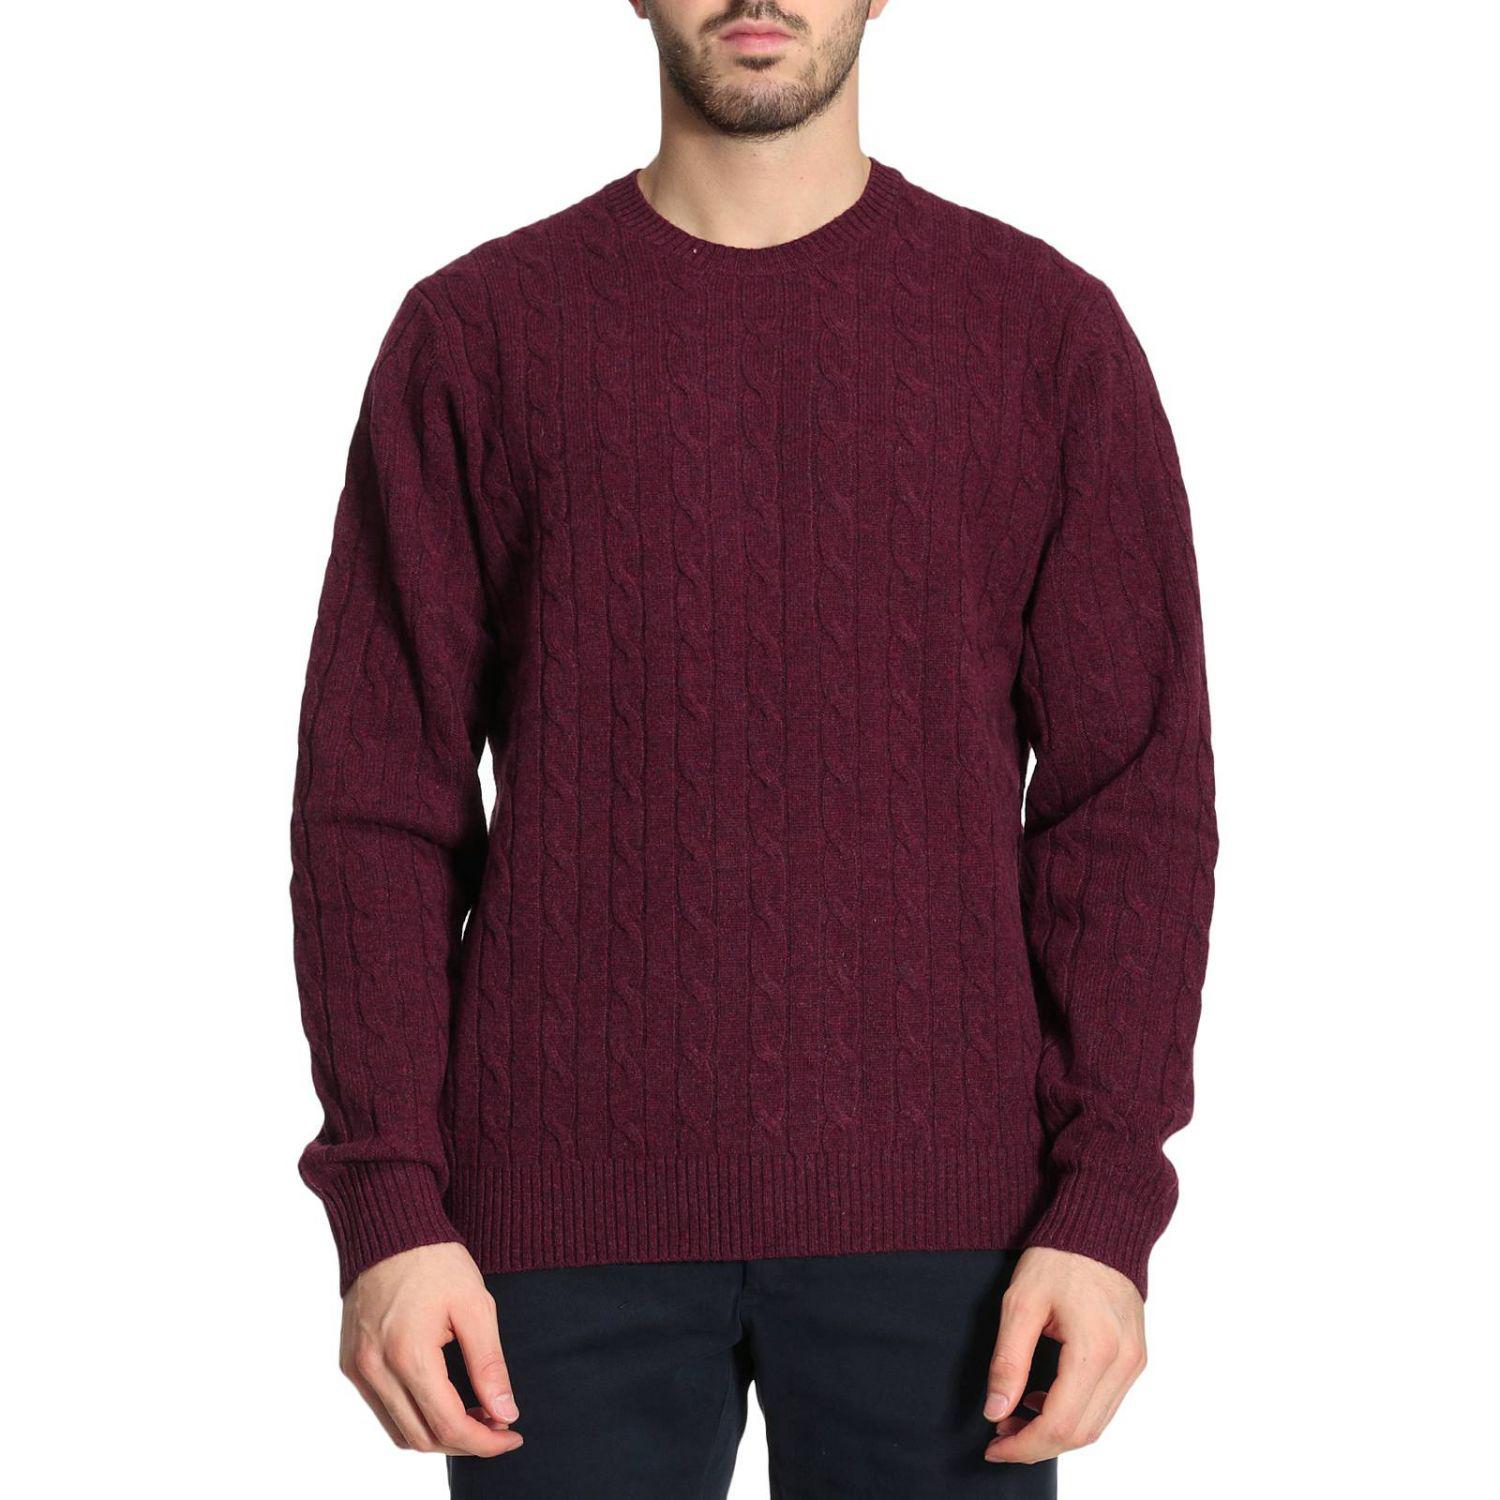 Lyst - Brooks brothers Sweater Men in Purple for Men